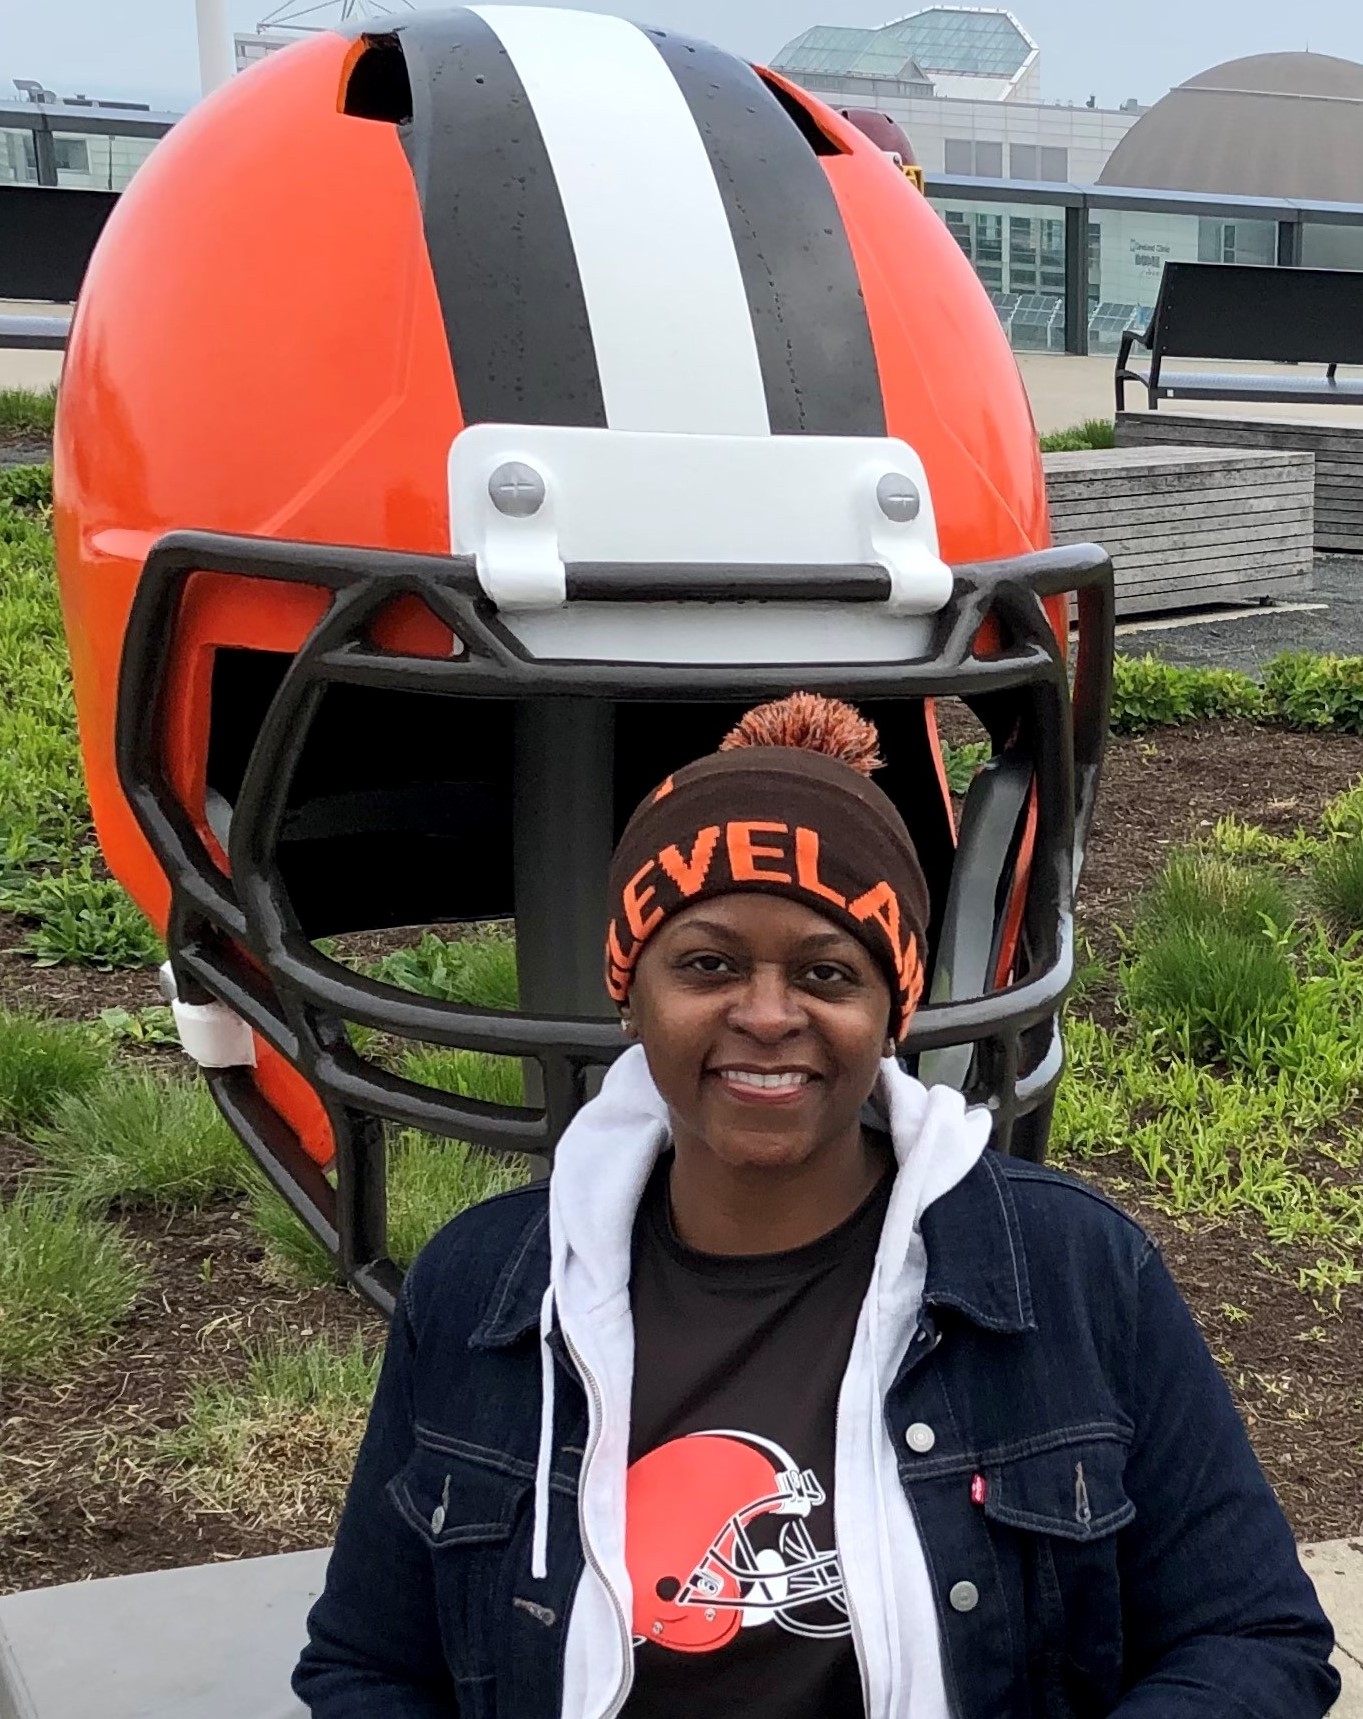 photo of Adrienne in a winter hat in front of a large Cleveland browns helmet